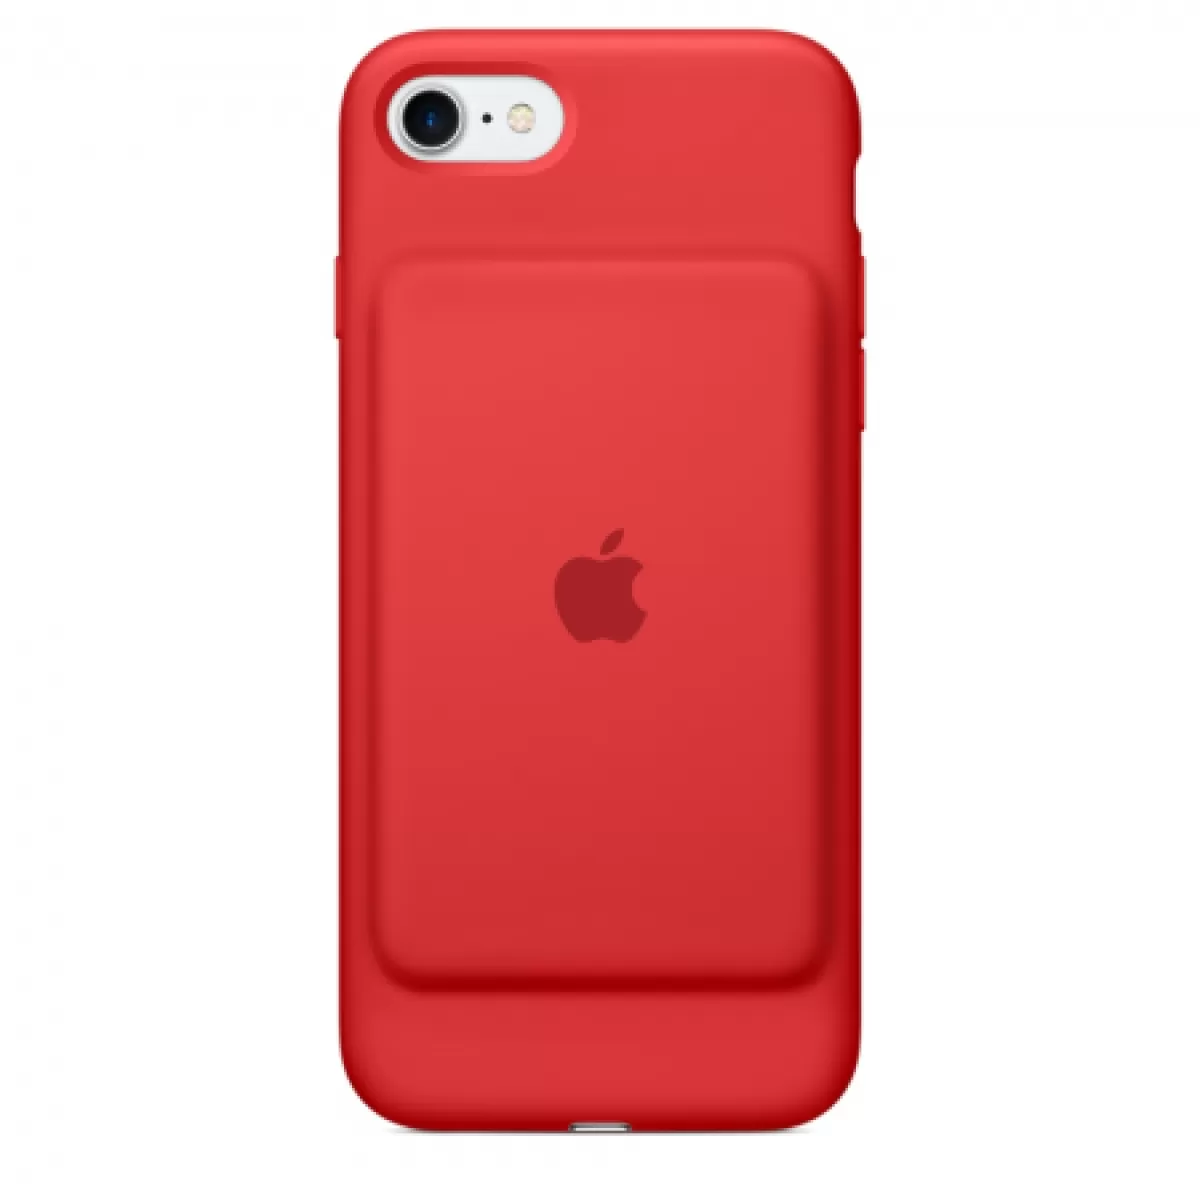 Apple iPhone 7 Smart Battery Case (PRODUCT) RED